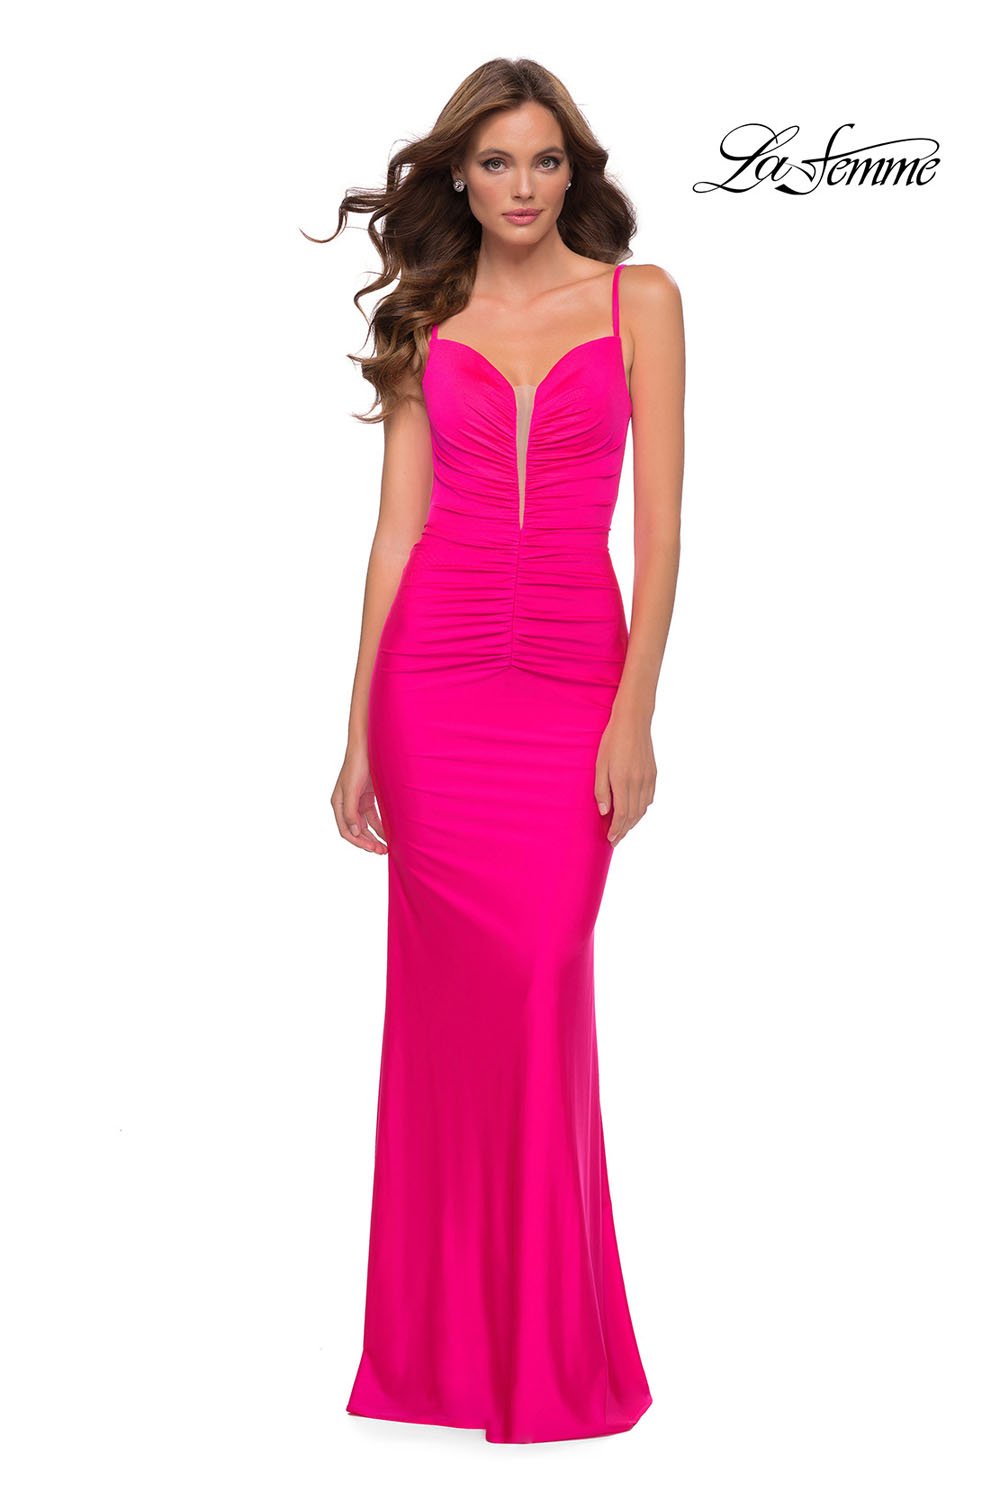 La Femme 29966 dress images in these colors: Neon Pink.